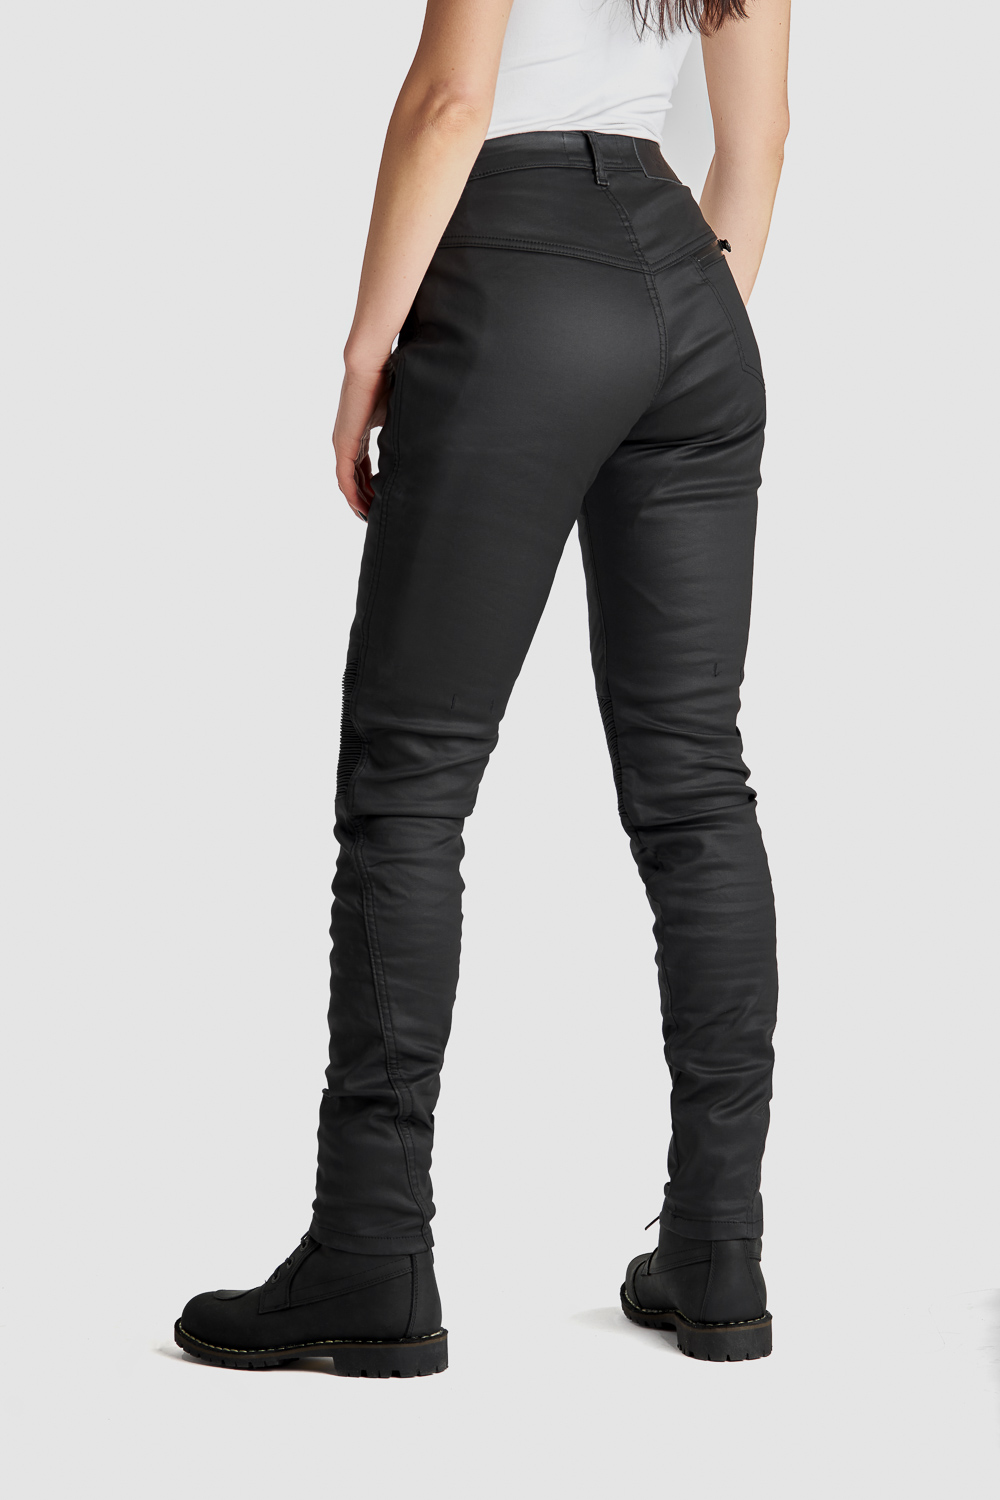 Women S Kevlar Motorcycle Jeans Canada – Best Images Limegroup.org